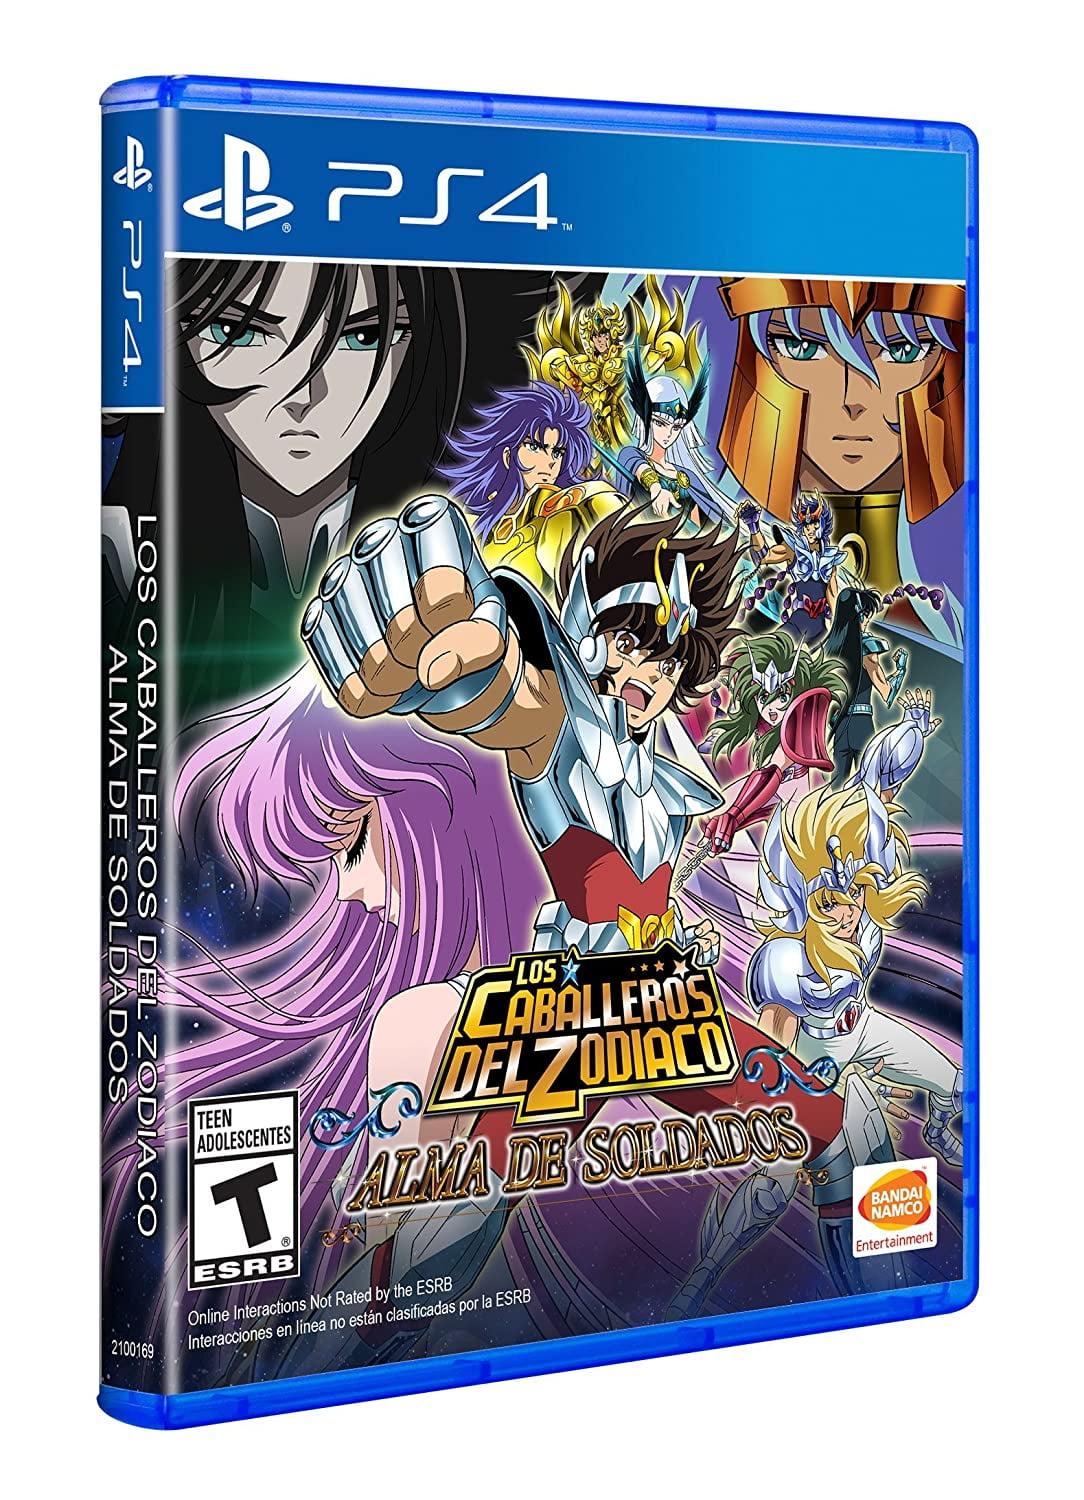 Saint Seiya: Soldier's Souls review for PS4 - Gaming Age